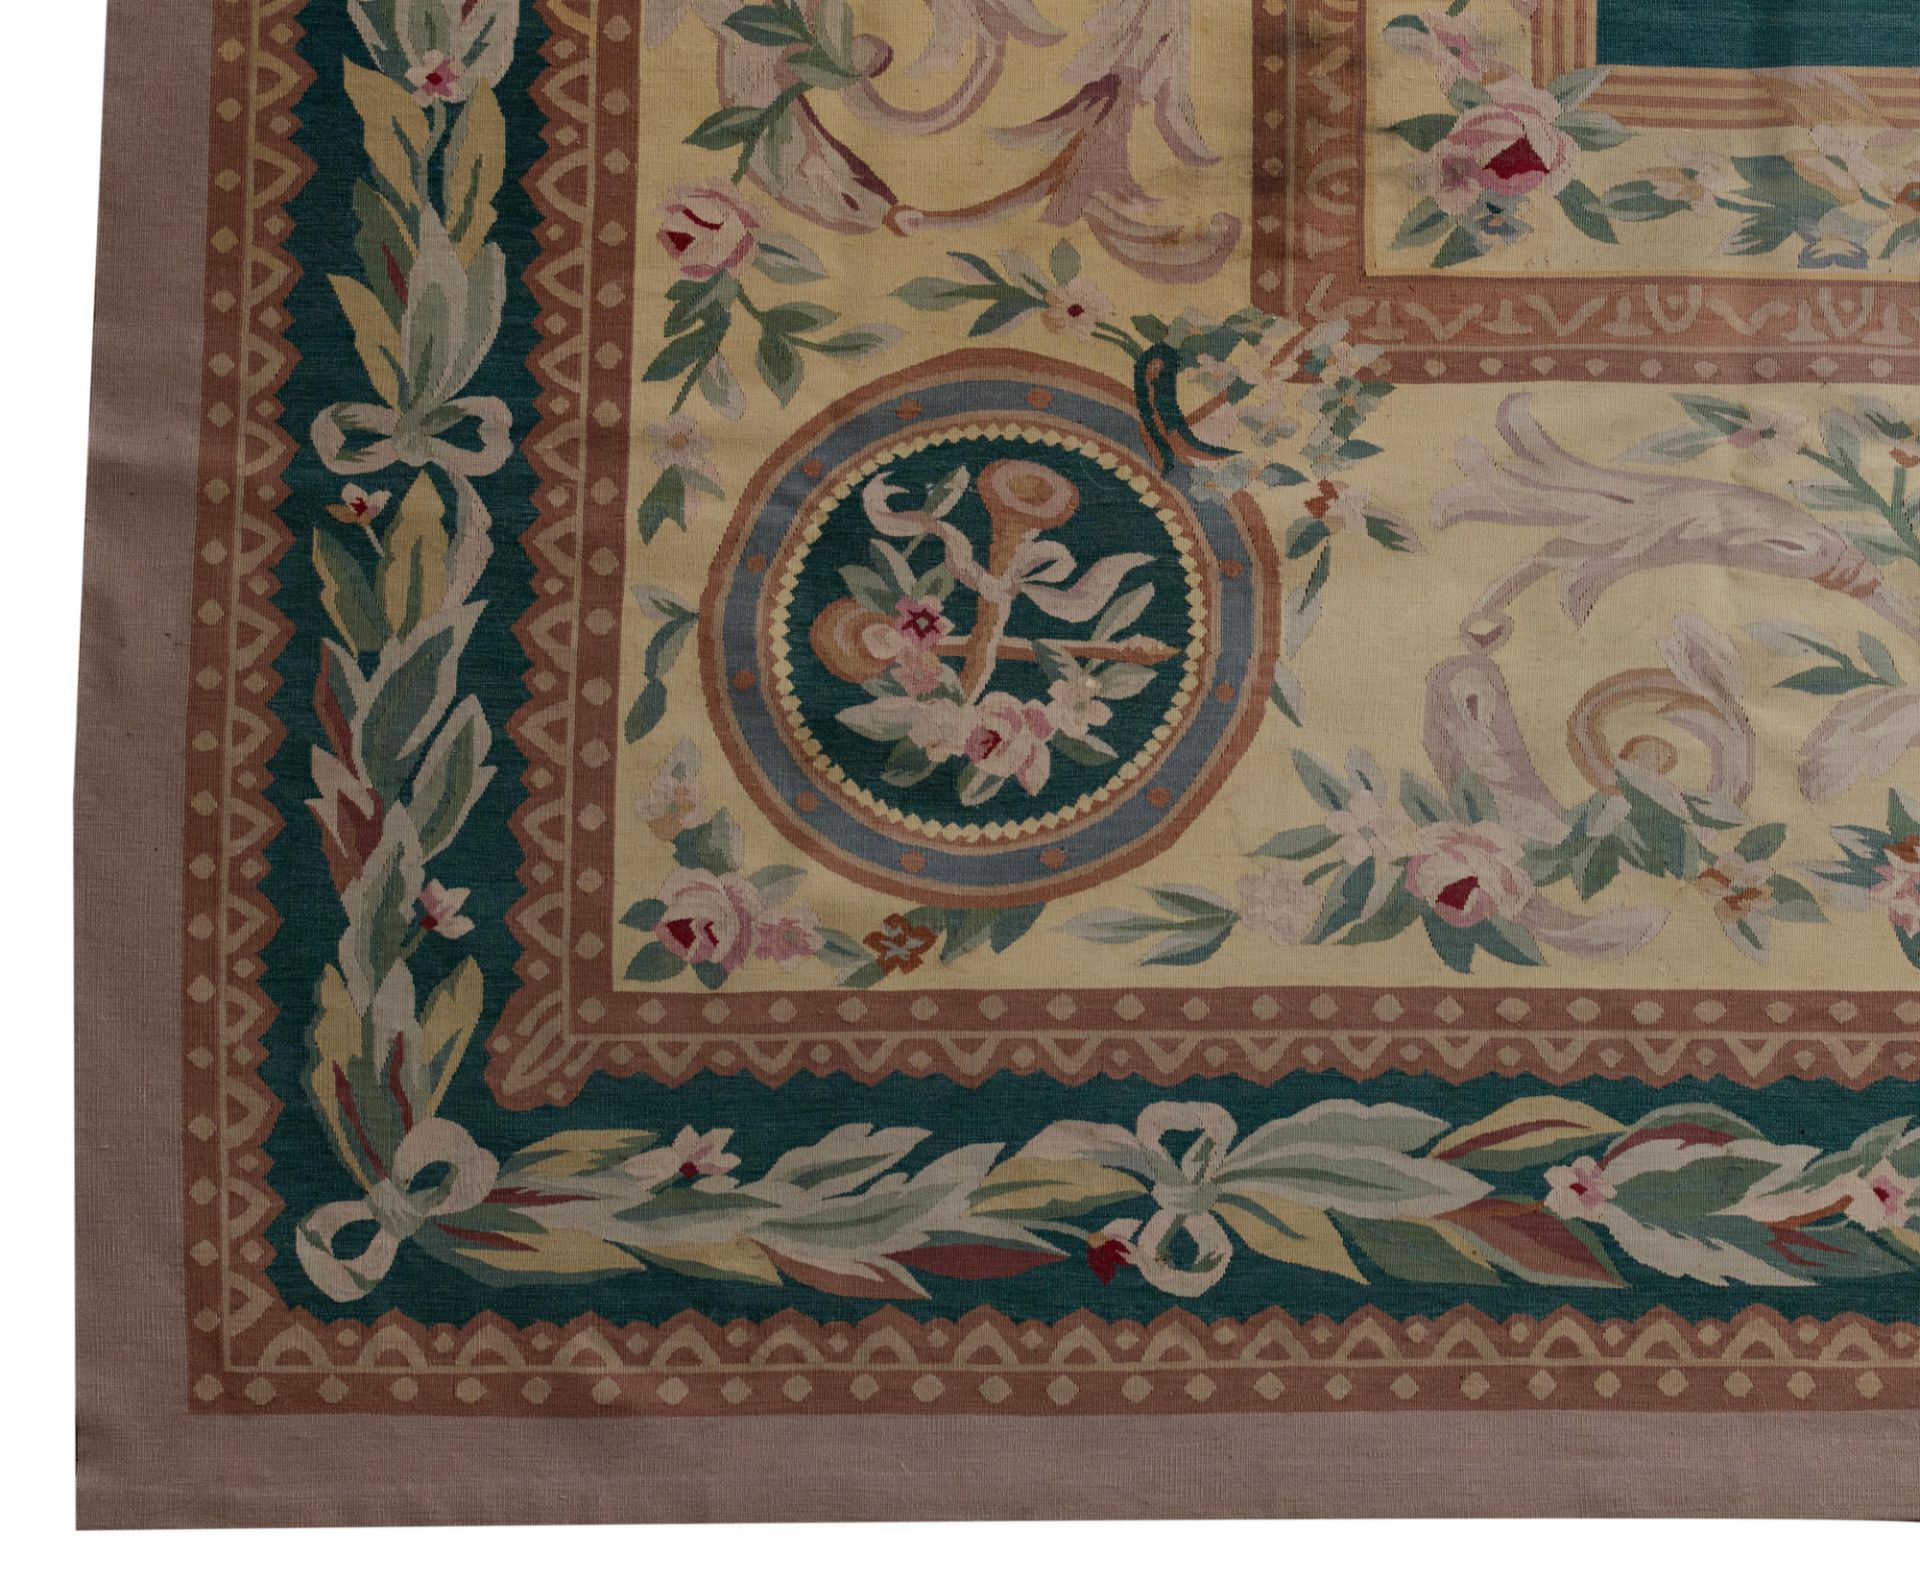 A large Aubusson rug, 553 x 370 cm - Image 4 of 9